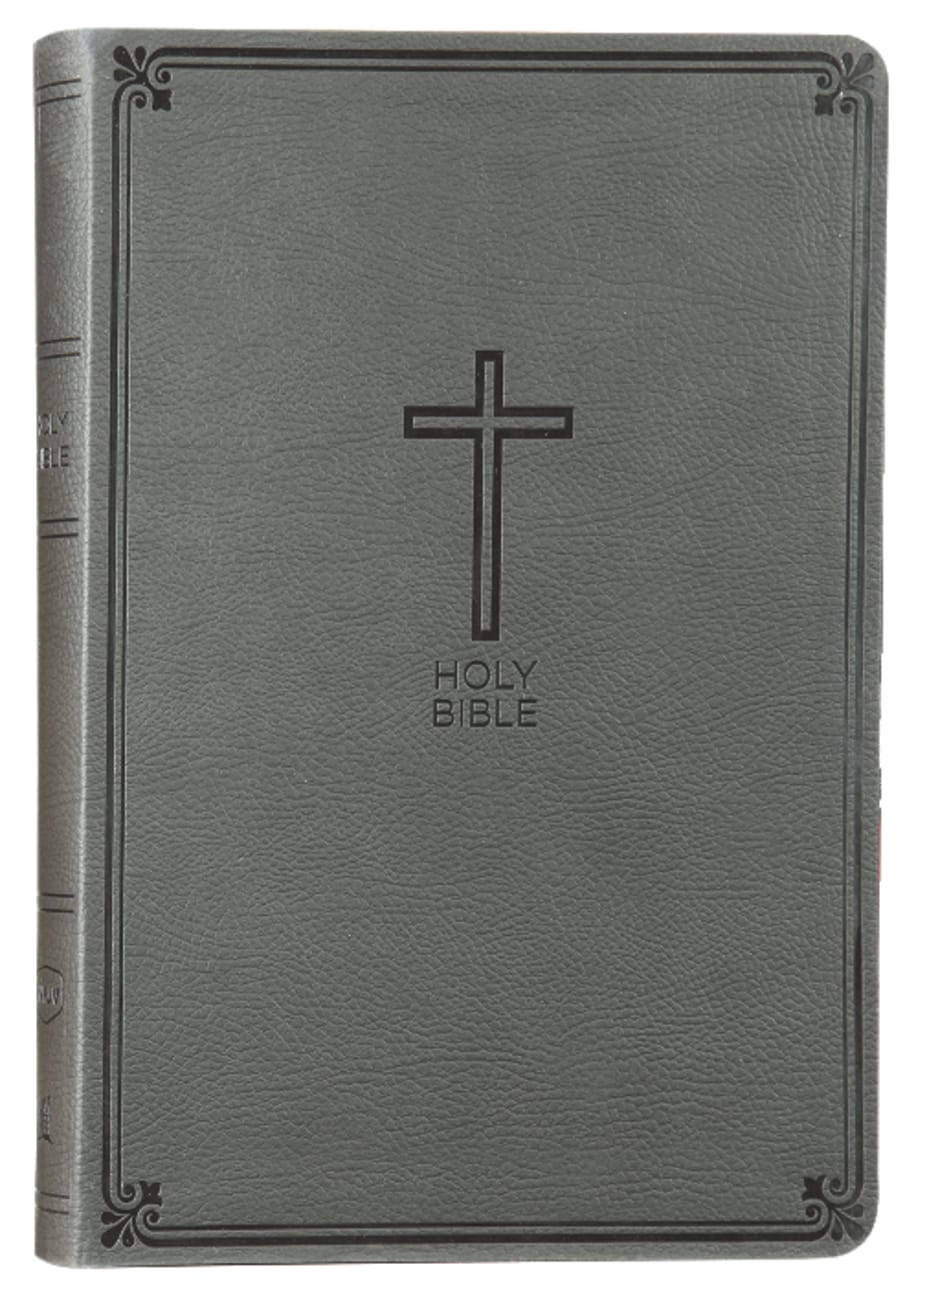 B NKJV VALUE THINLINE BIBLE LARGE PRINT CHARCOAL (RED LETTER EDITION)